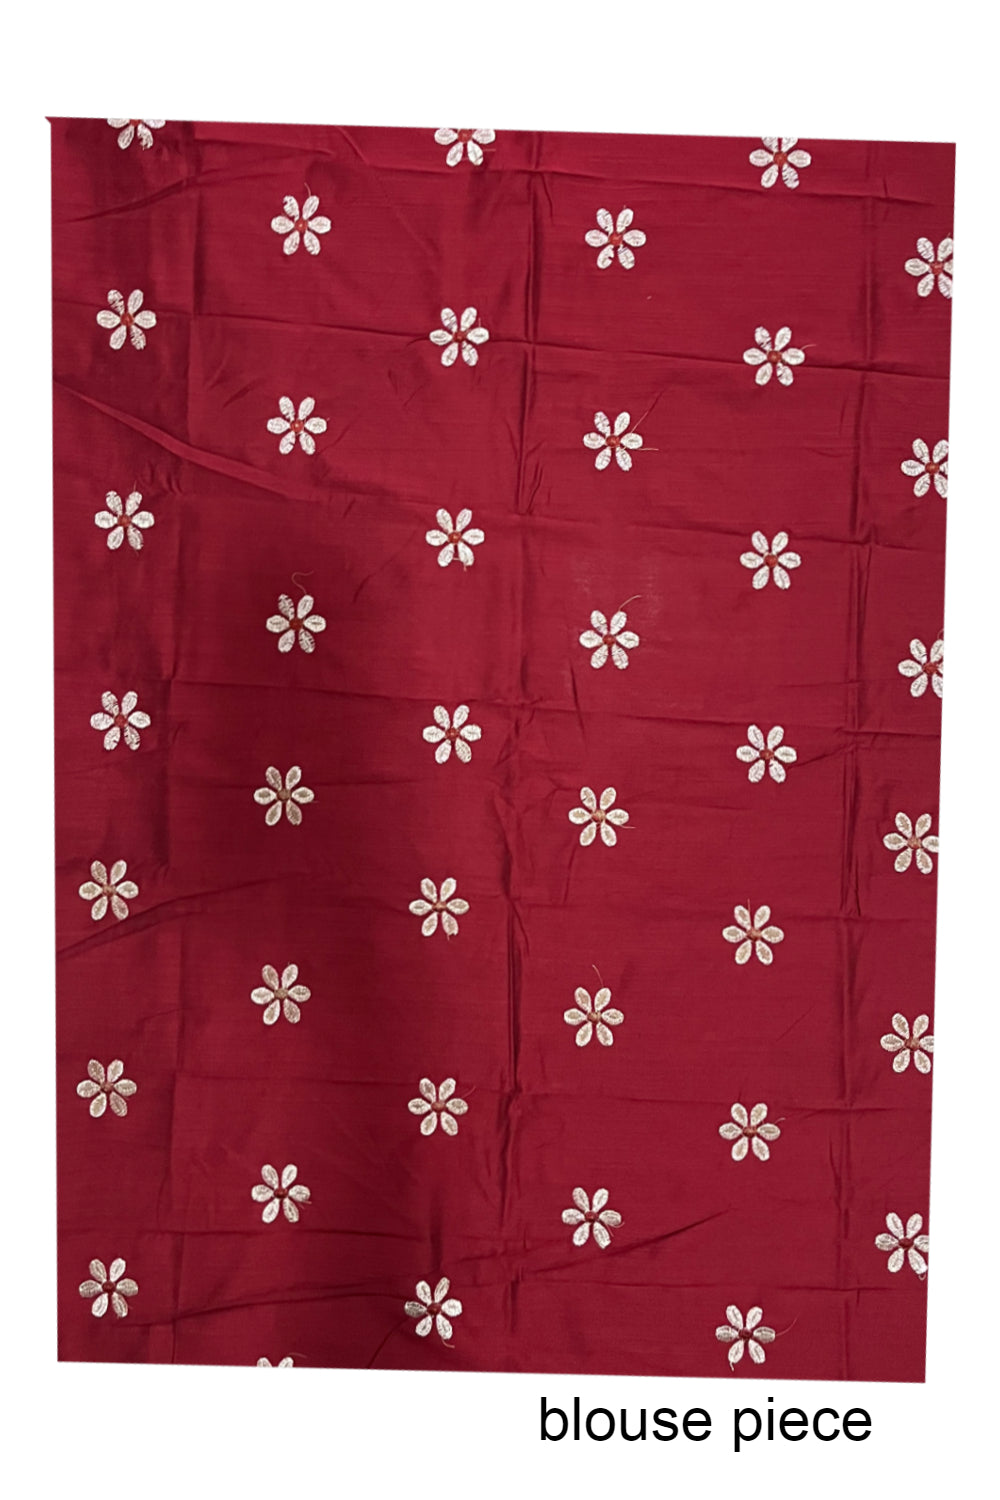 Kerala Silver Tissue Kasavu Saree with Floral Embroidery Works on Body and Maroon Blouse Piece